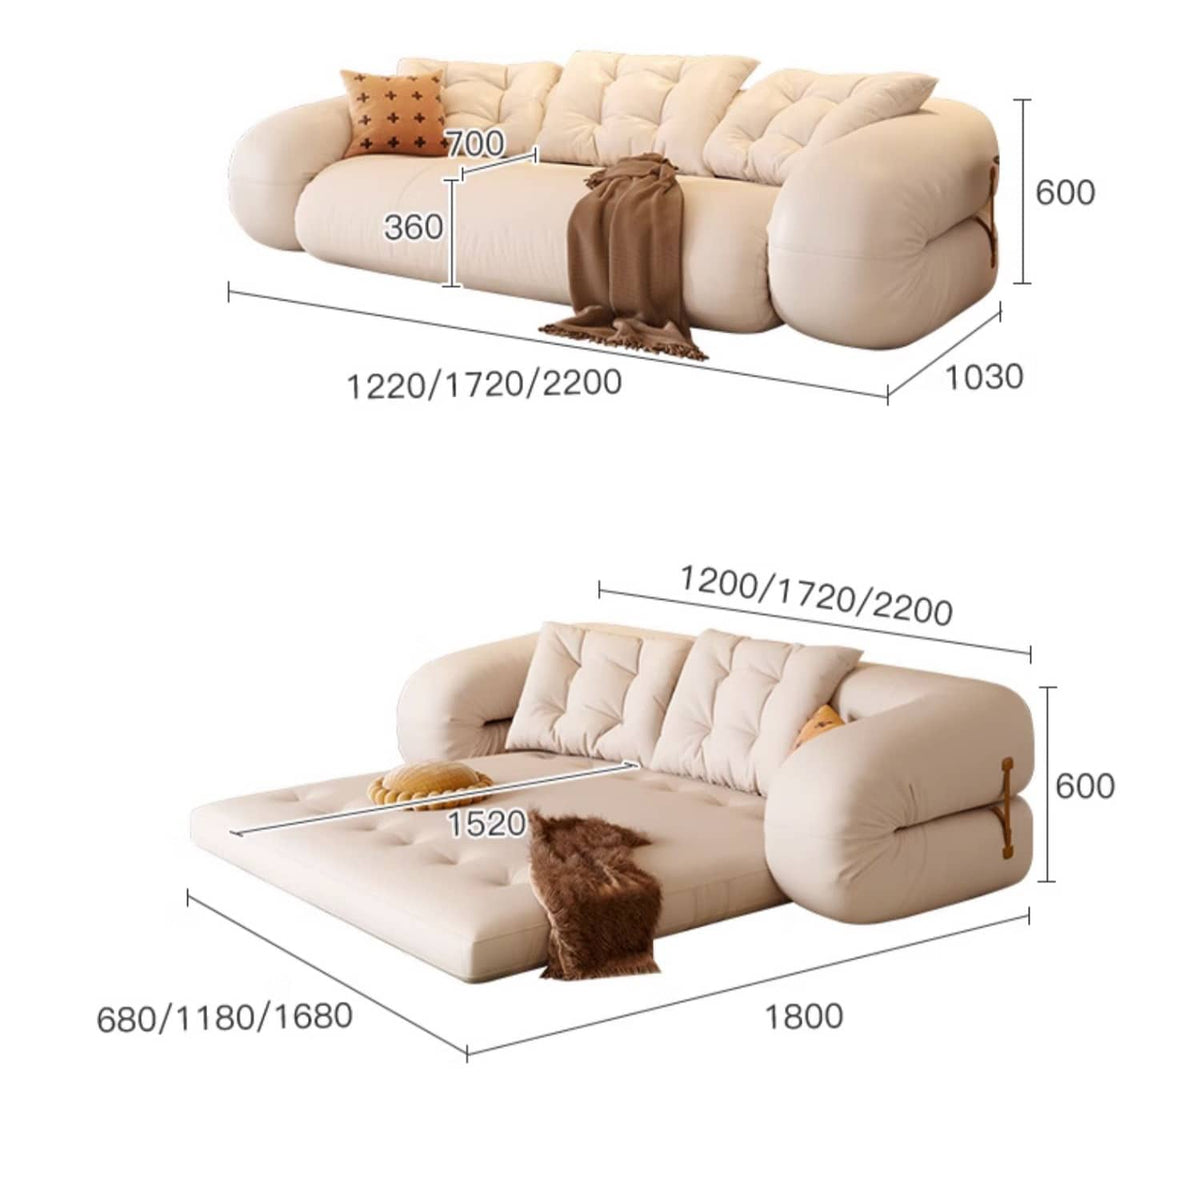 Stylish Cotton Beige Figure Sofa – Perfect Blend of Comfort and Elegance fbby-1402